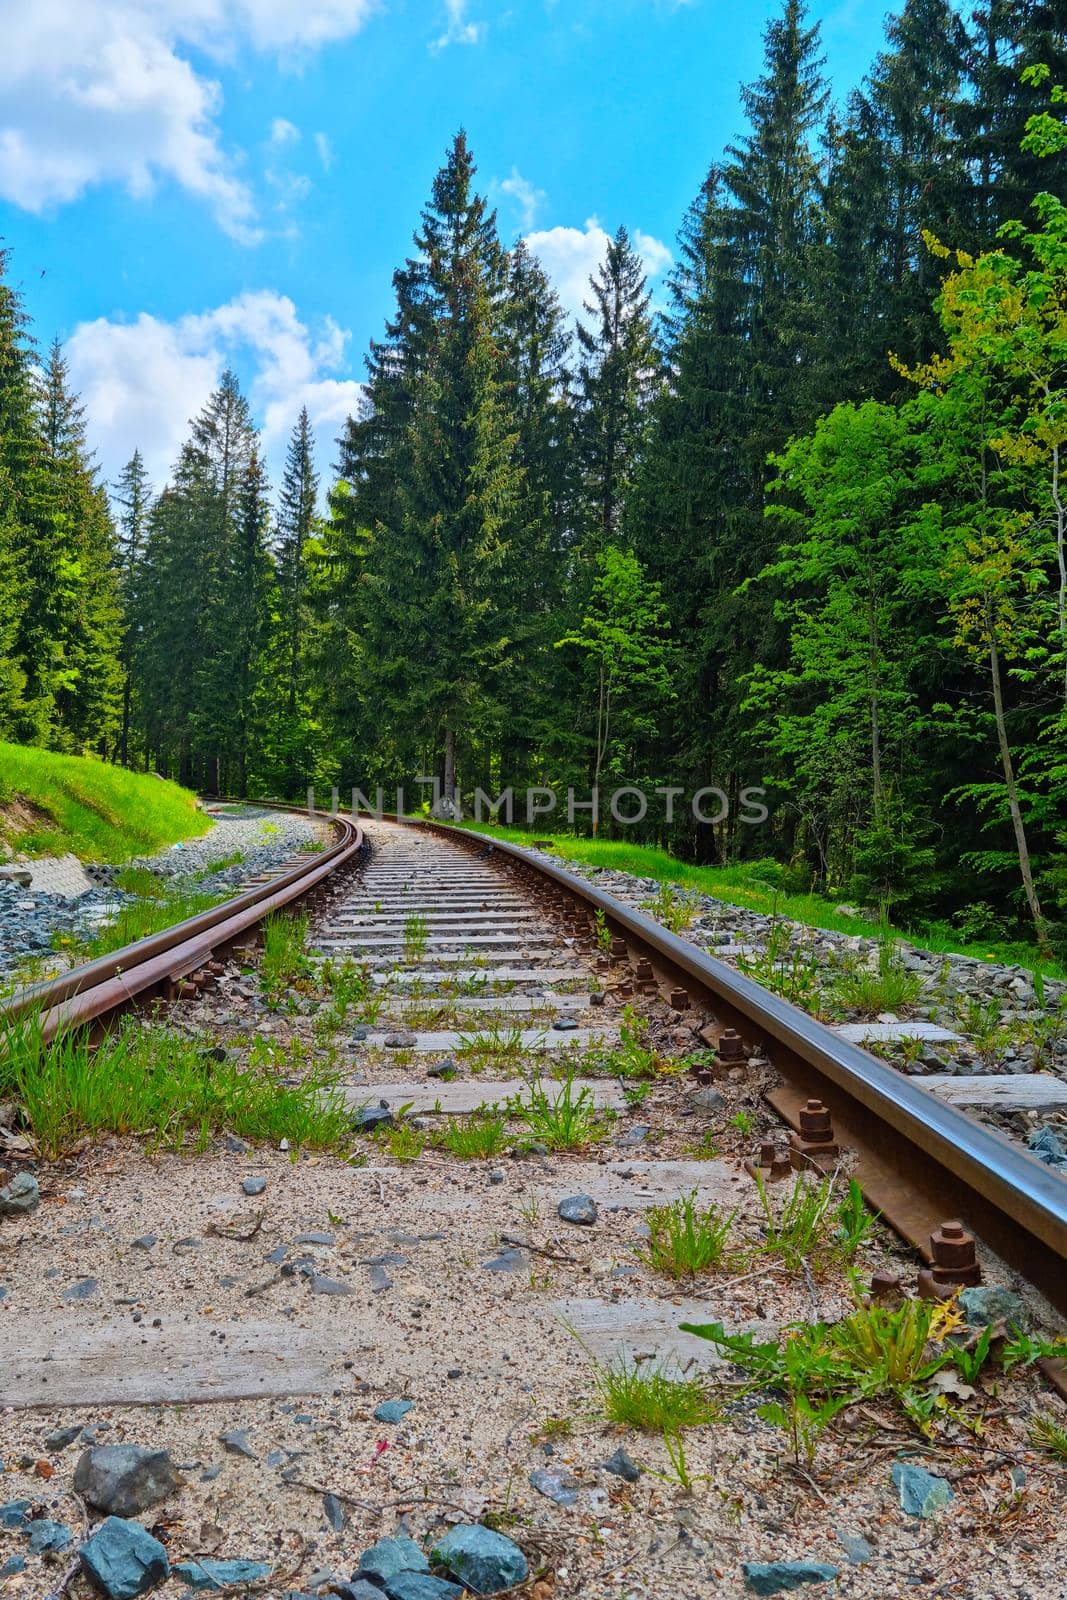 The picturesque railway passes through a green forest. by kip02kas